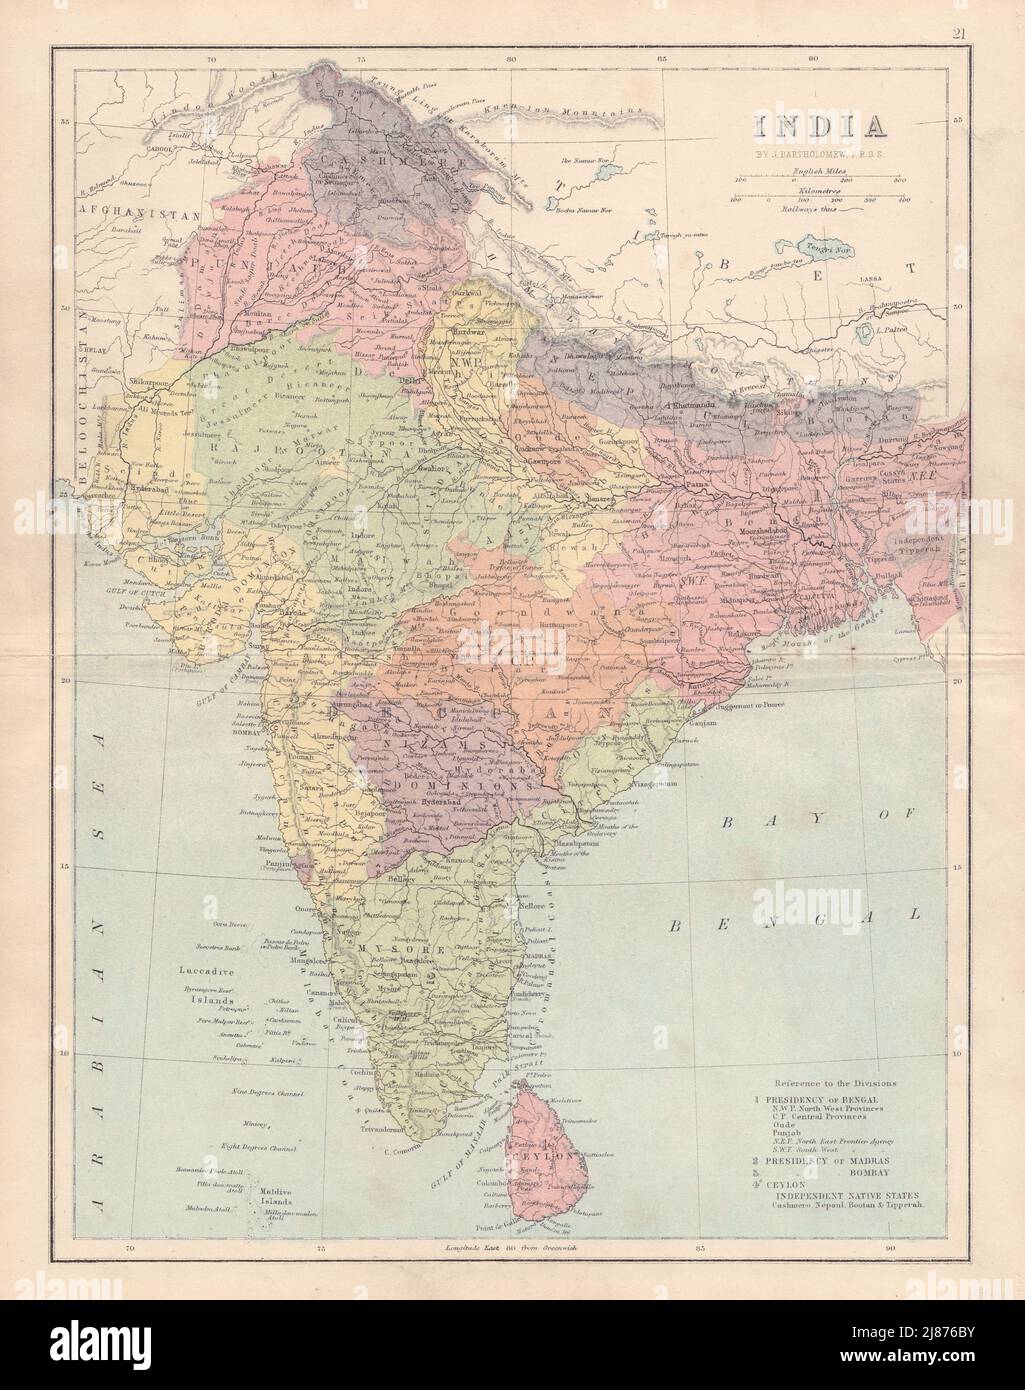 BRITISH INDIA. Showing states, French & Portuguese settlements. COLLINS 1873 map Stock Photo